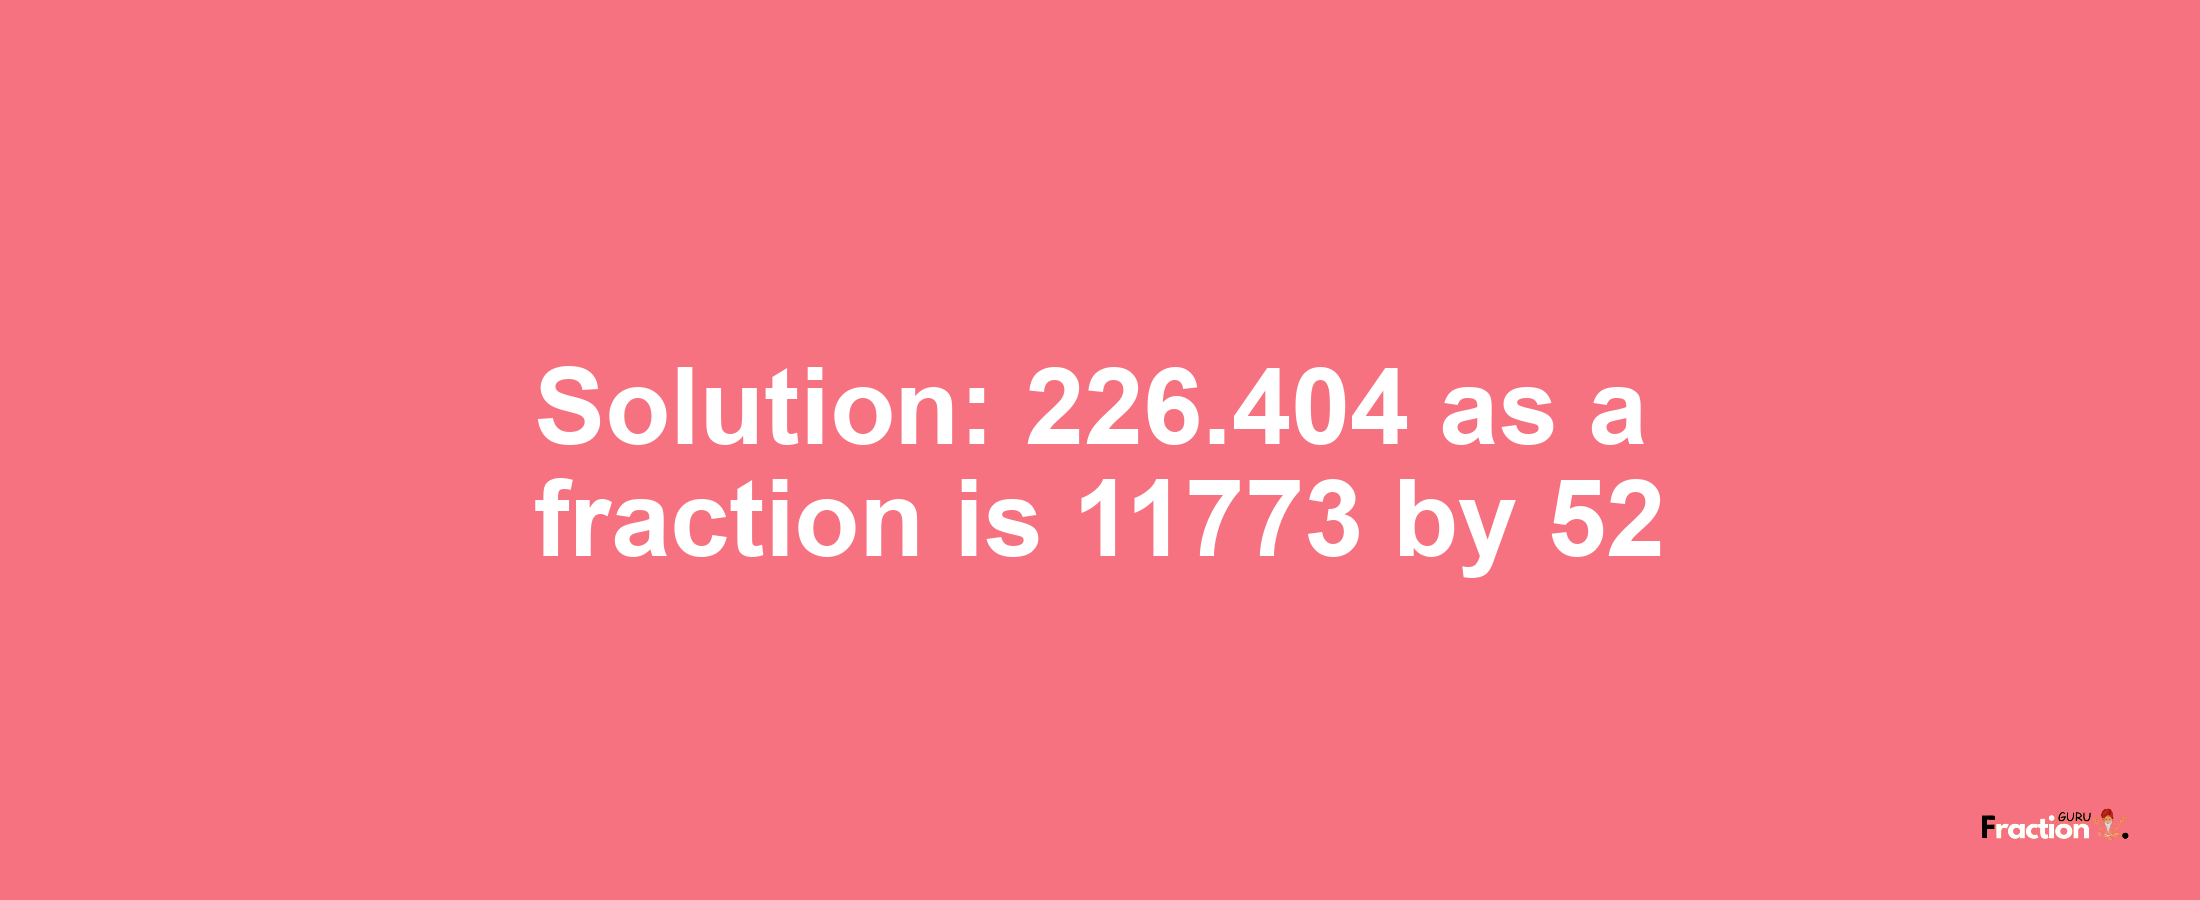 Solution:226.404 as a fraction is 11773/52